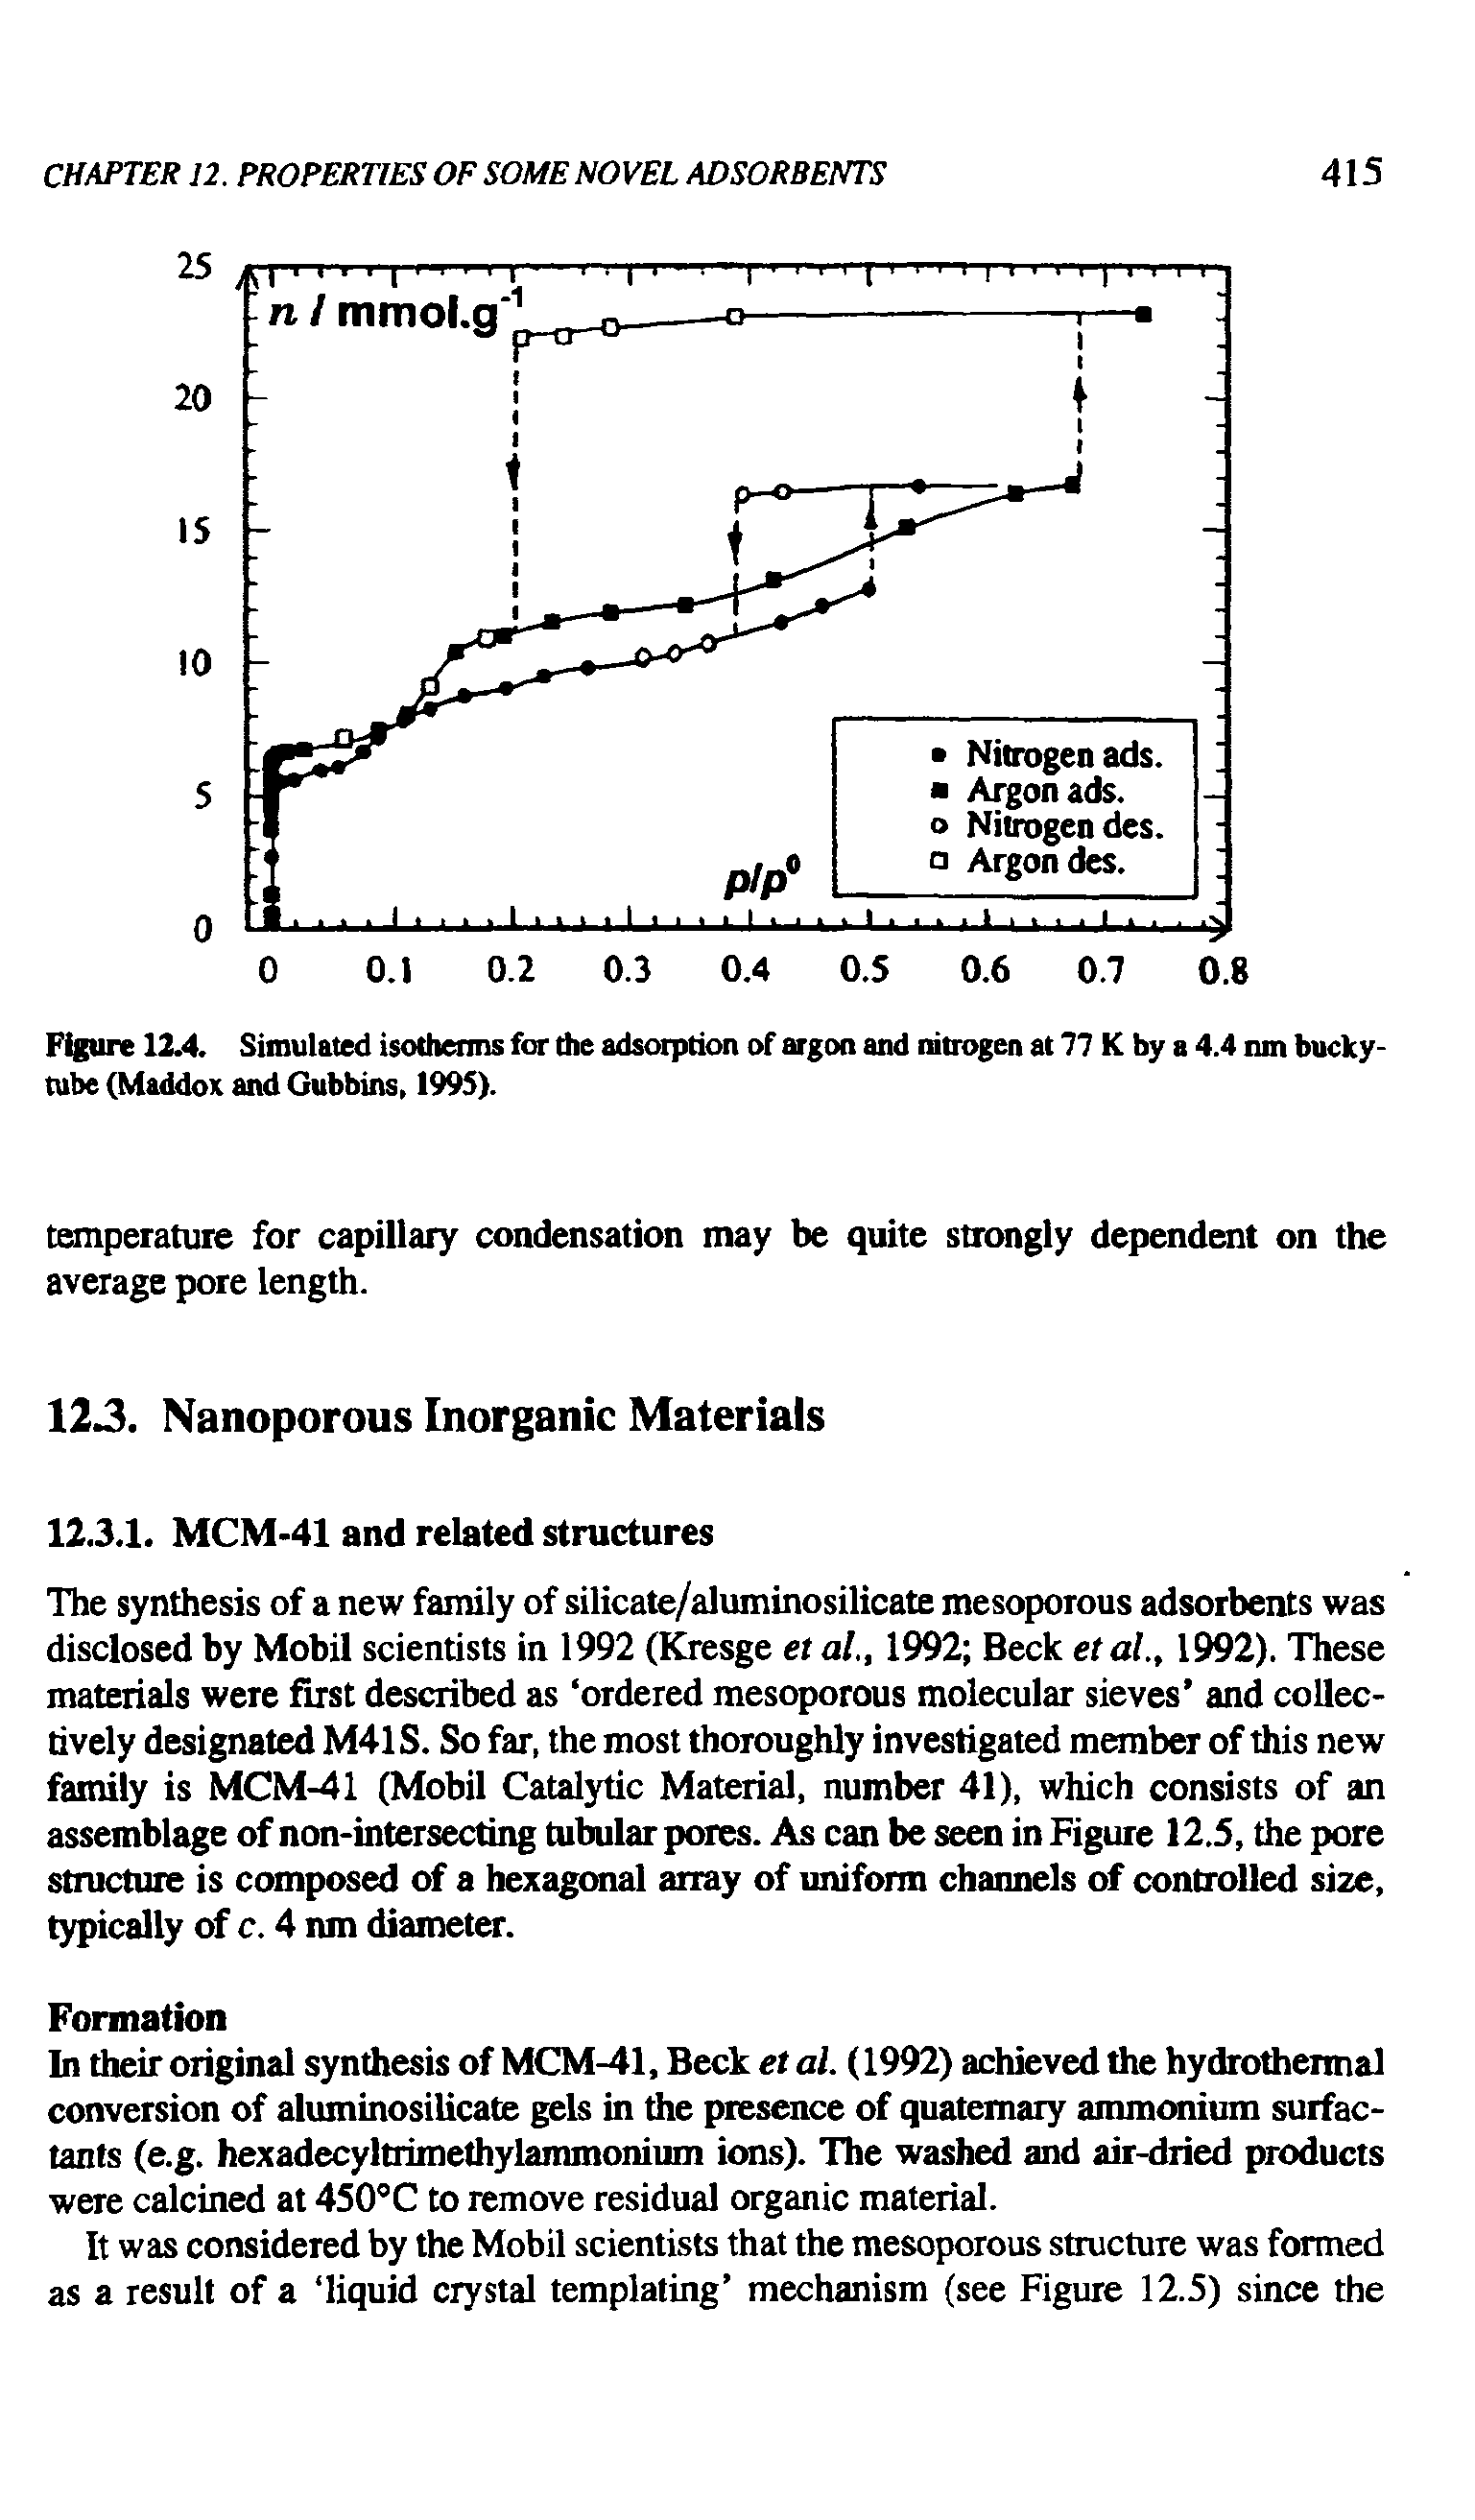 Figure 12.4. Simulated isotherms for the adsorption of argon and nitrogen at 77 K by a 4.4 nm bucky-tube (Maddox and Gubbins, 1995).